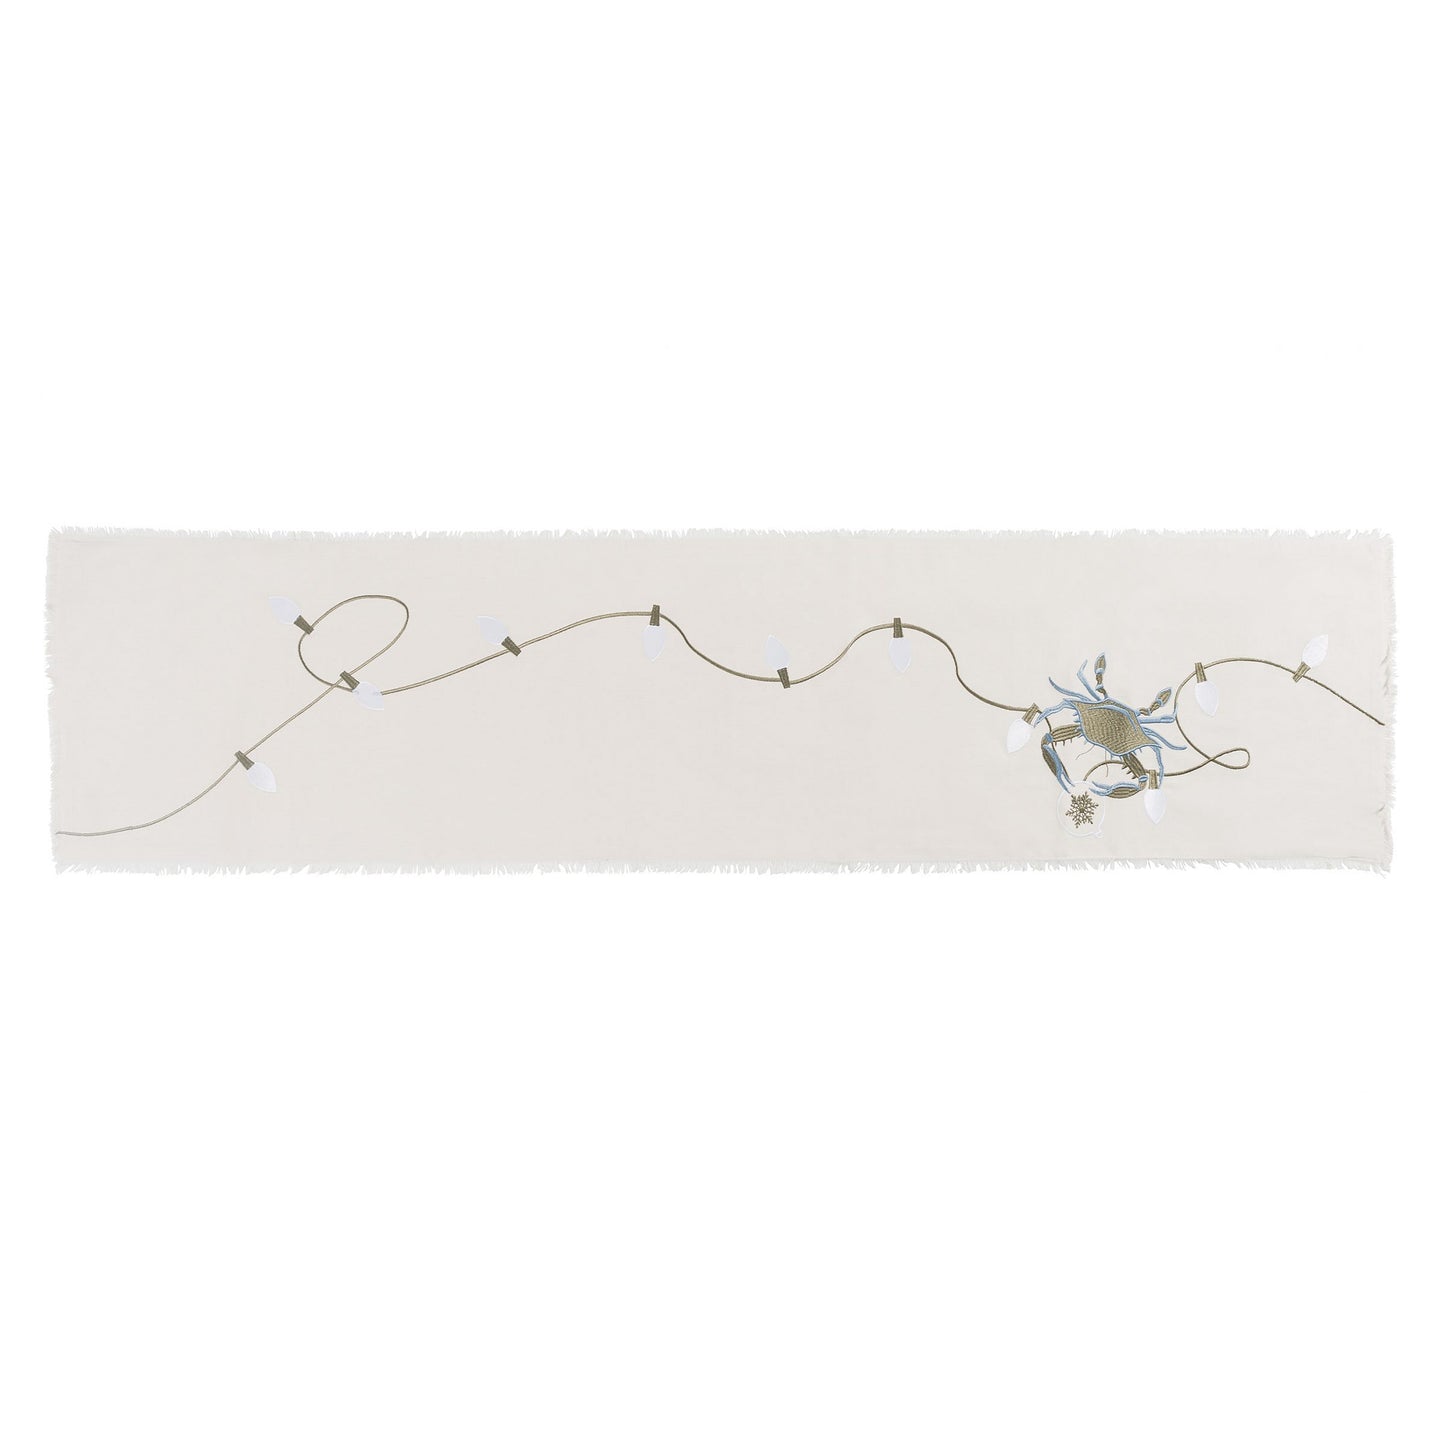 Blue crab and holiday lights embroidered on natural cotton table runner with fringed edges. 